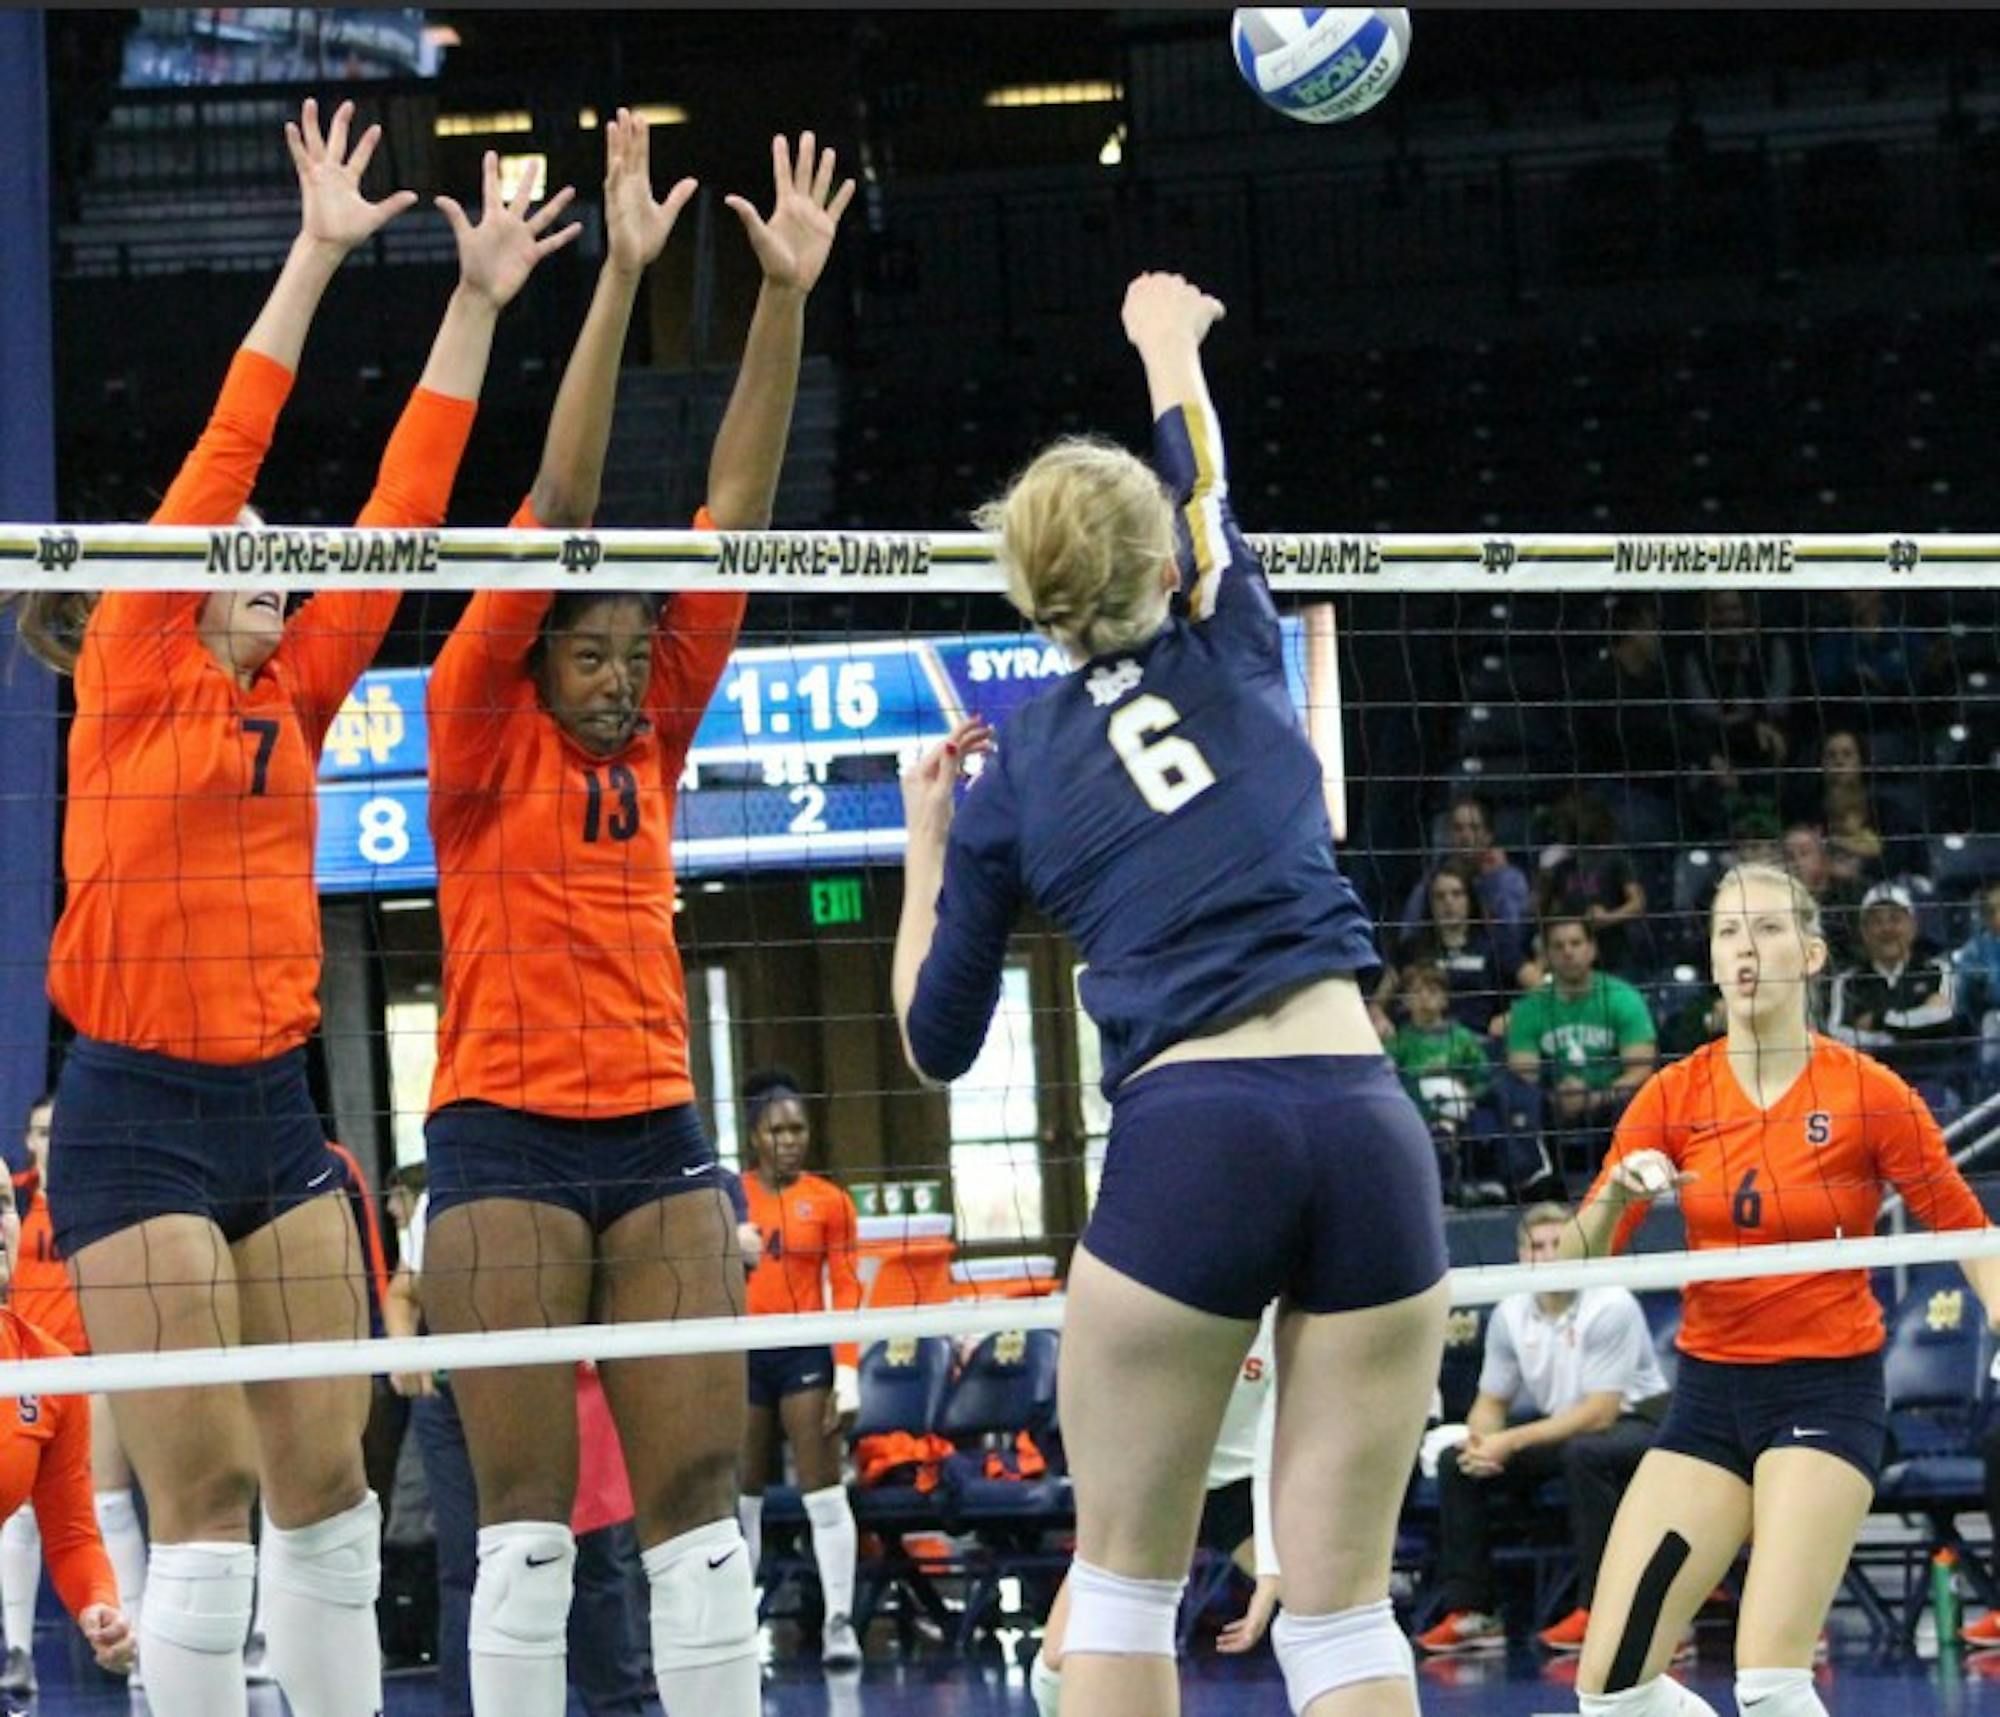 Sophomore outside hitter Maddie Plumlee spikes the ball during a 3-2 loss to Syracuse on Sunday at Purcell Pavilion.